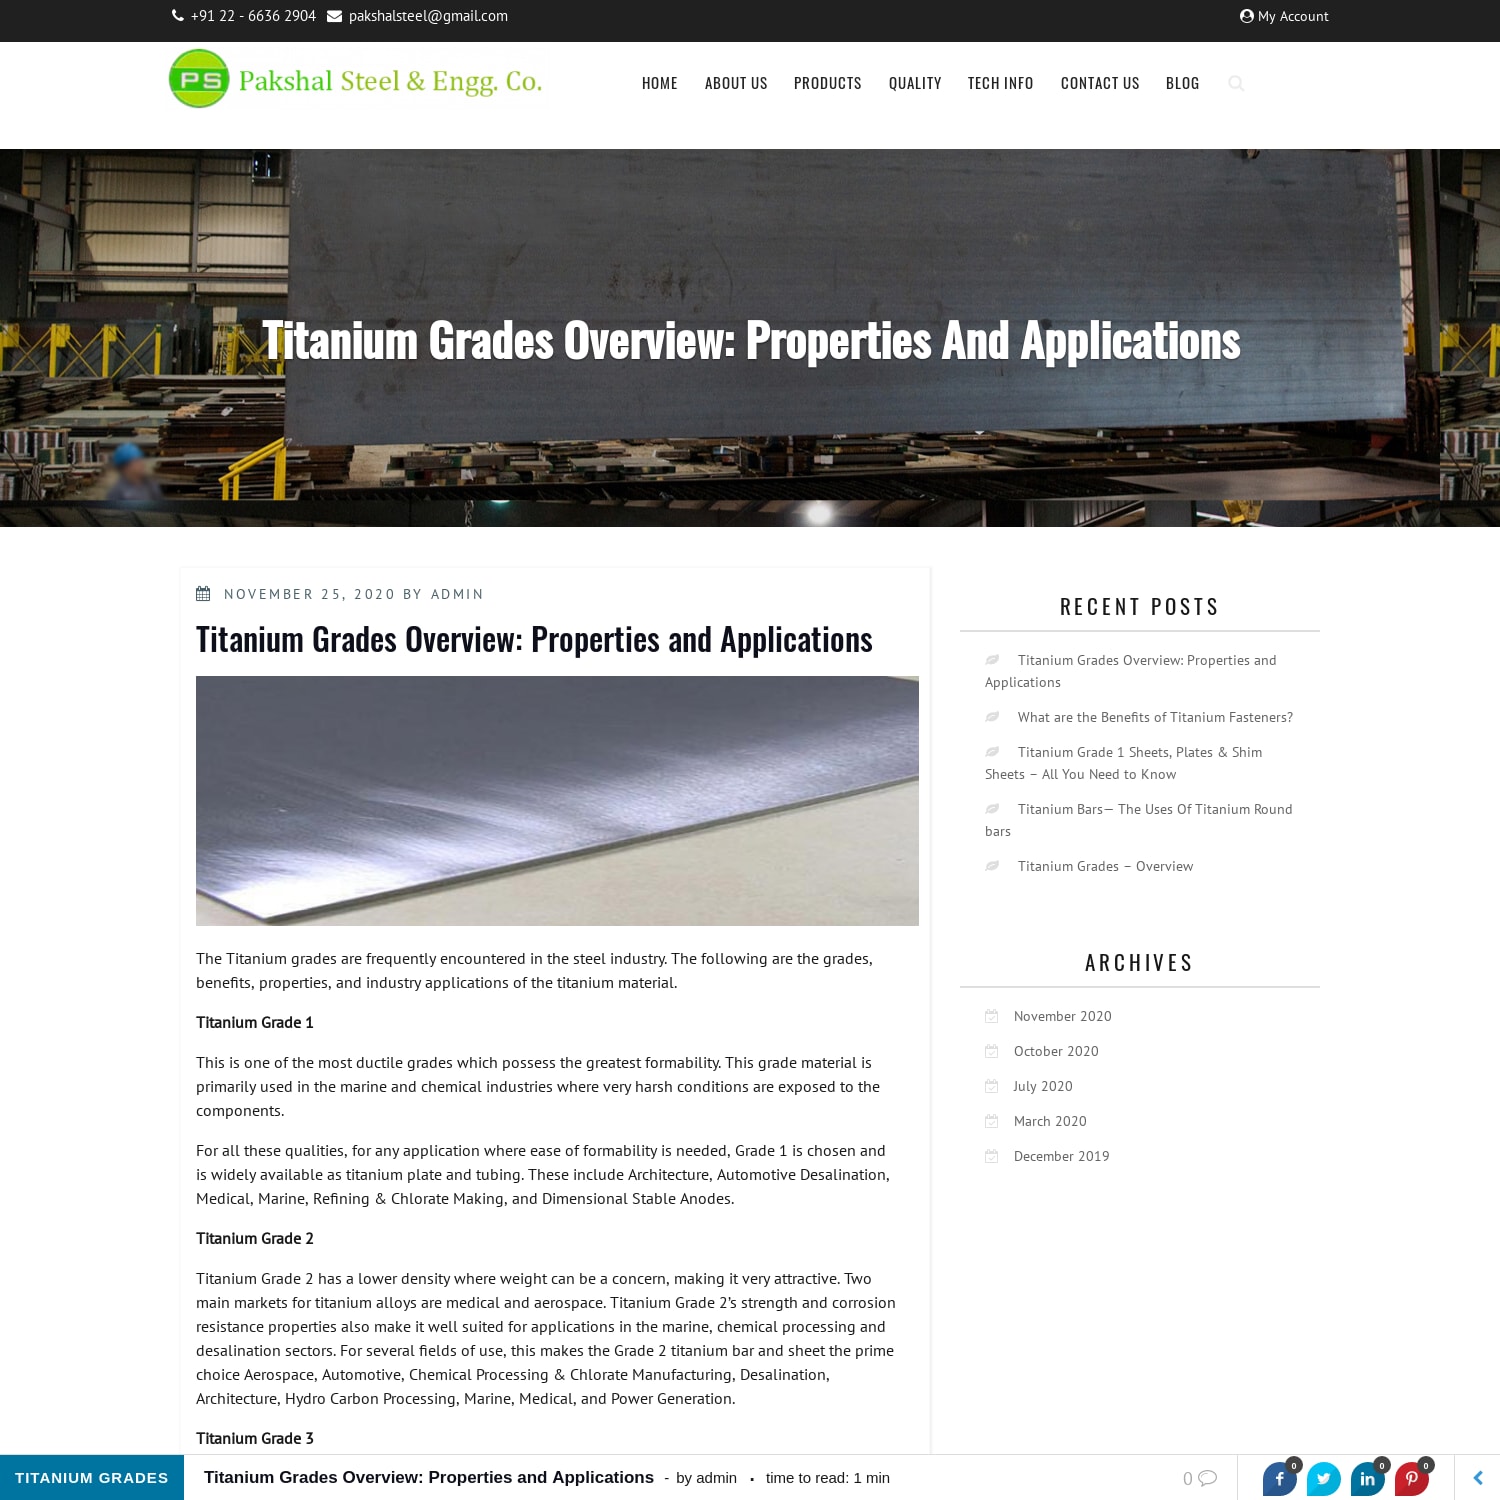 Titanium Grades Overview: Properties and Applications -